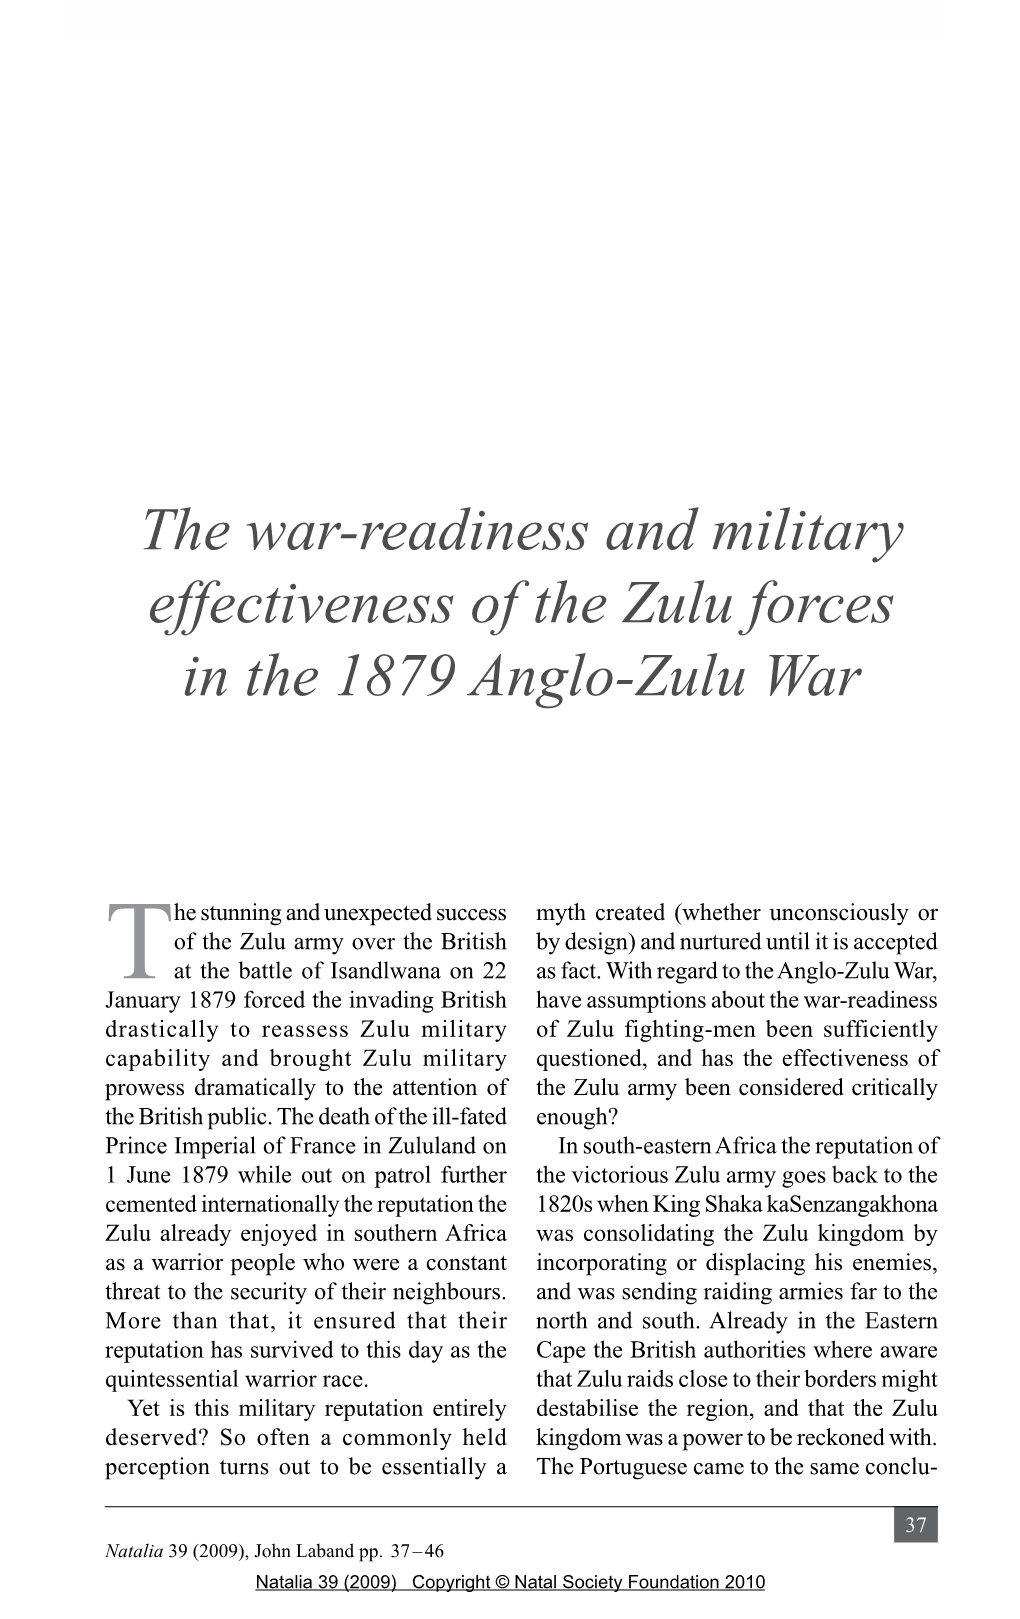 The War-Readiness and Military Effectiveness of the Zulu Forces in the 1879 Anglo-Zulu War